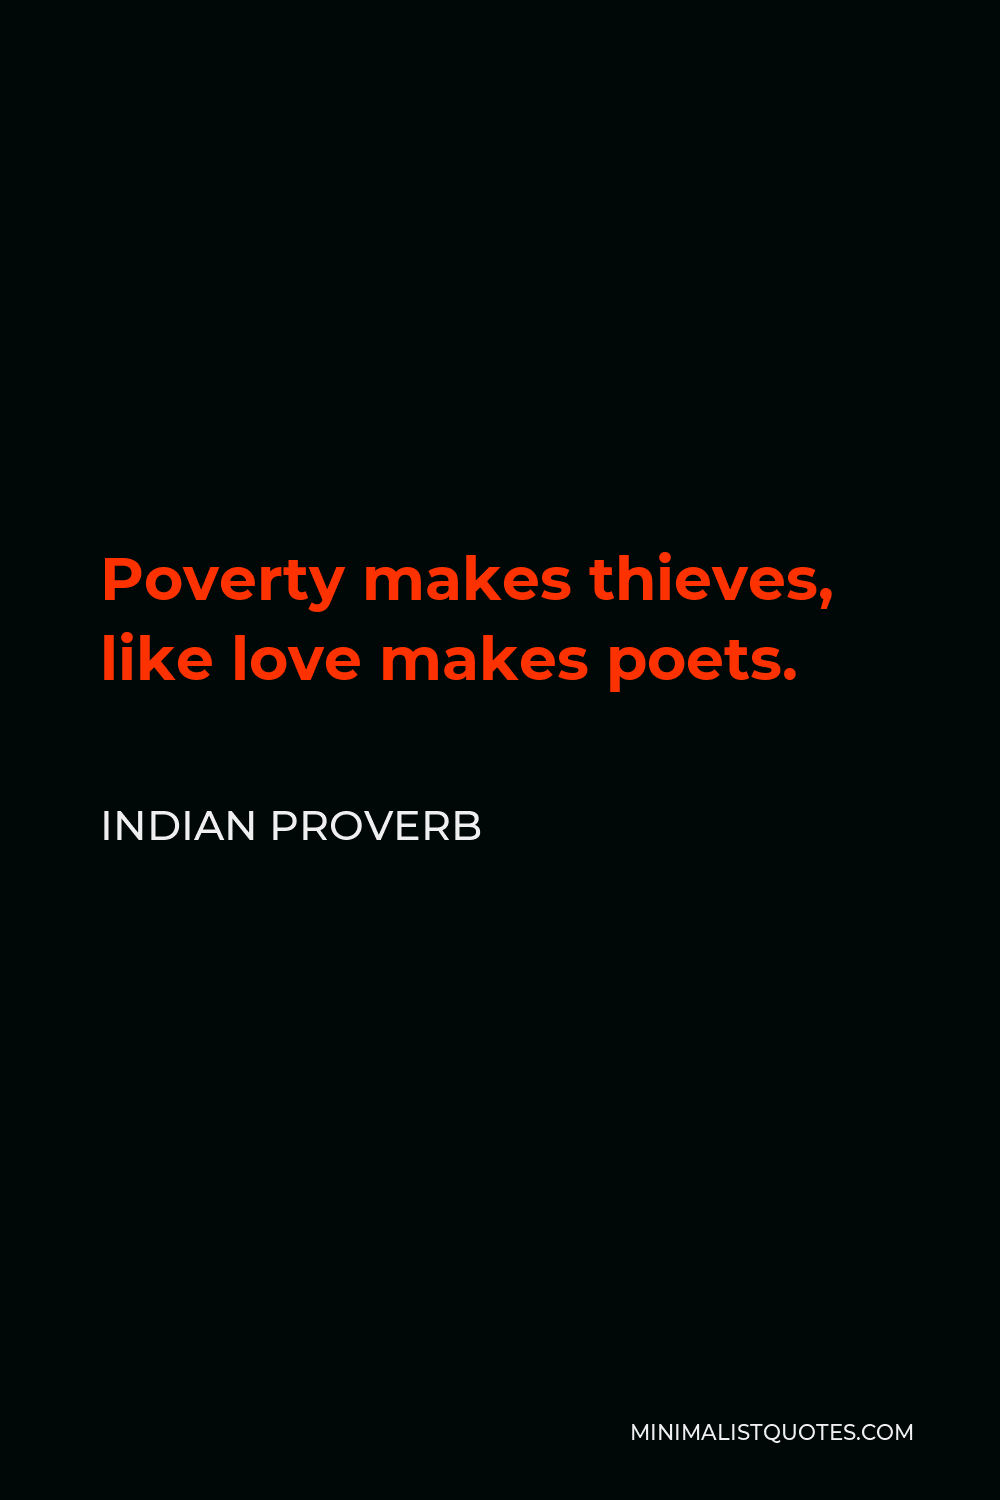 Indian Proverb Quote - Poverty makes thieves, like love makes poets.